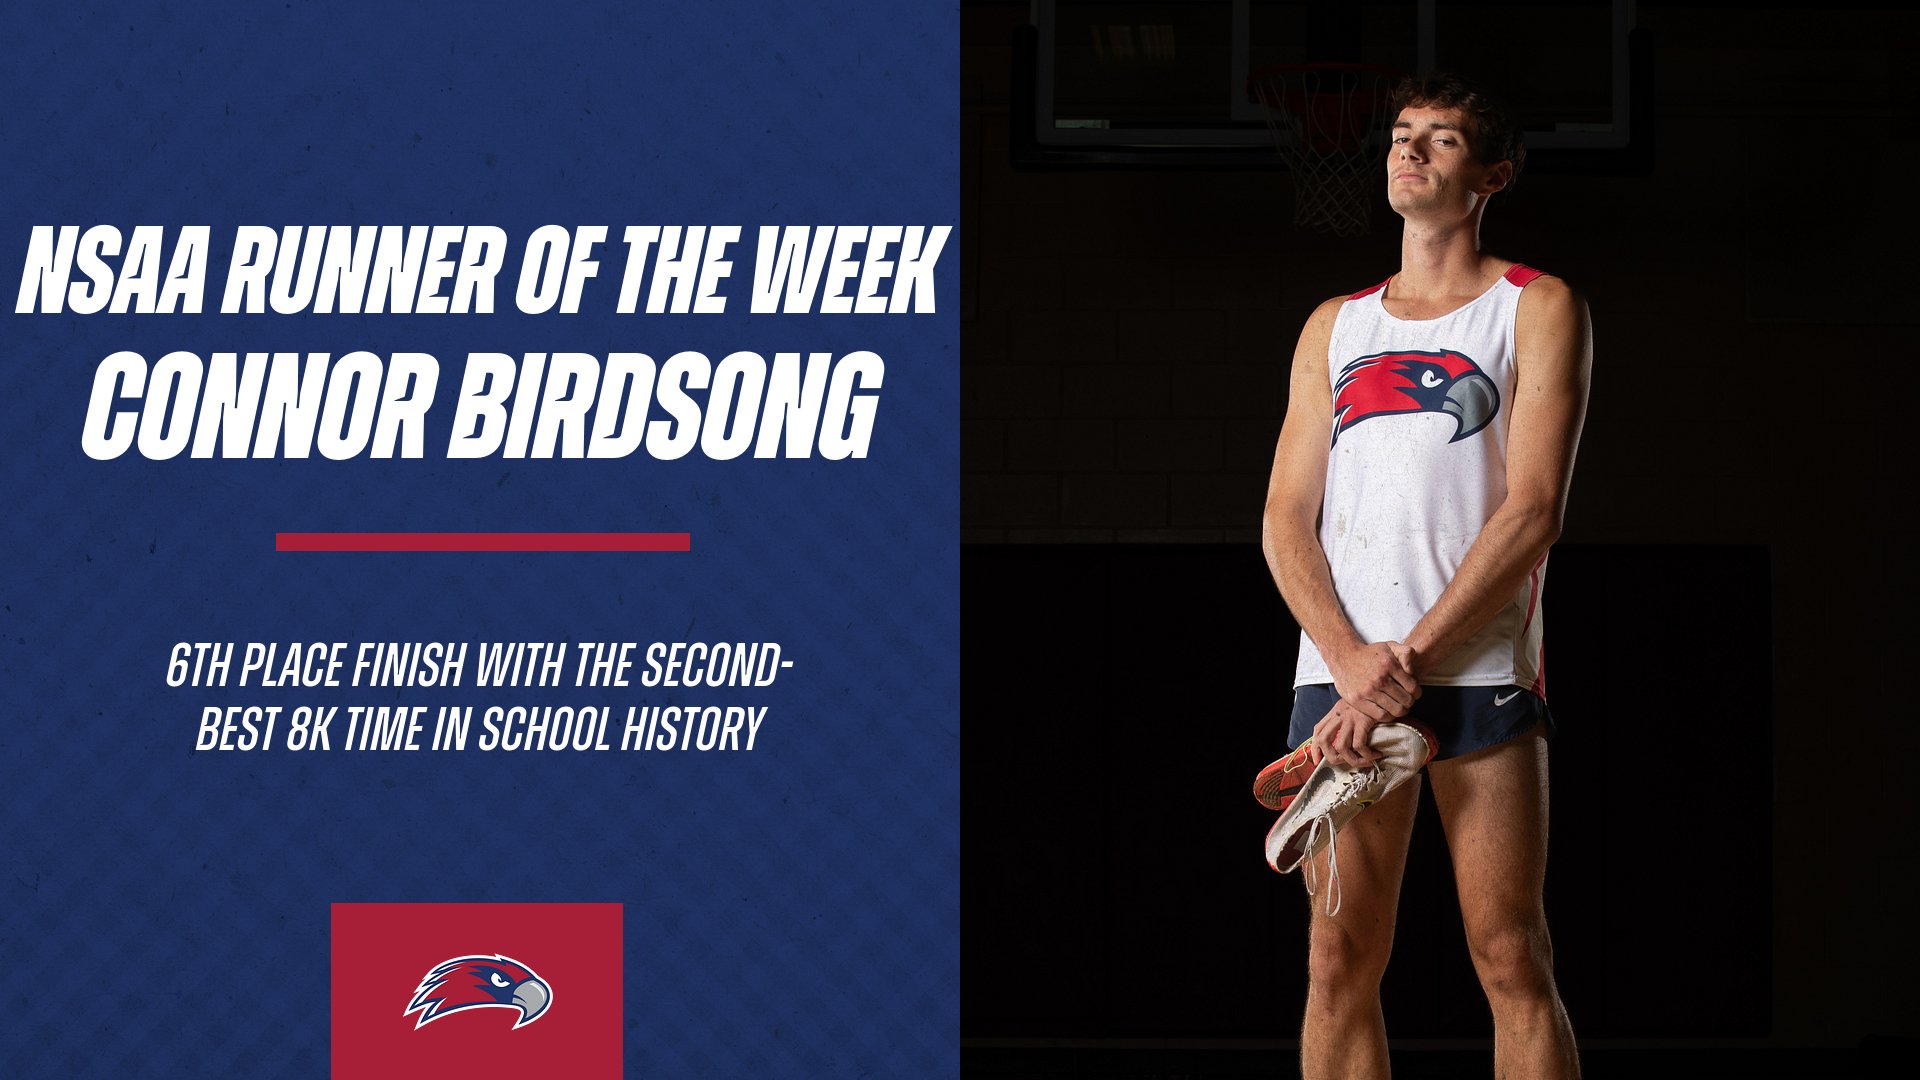 Birdsong Named Runner of the Week for the Second Week in a Row